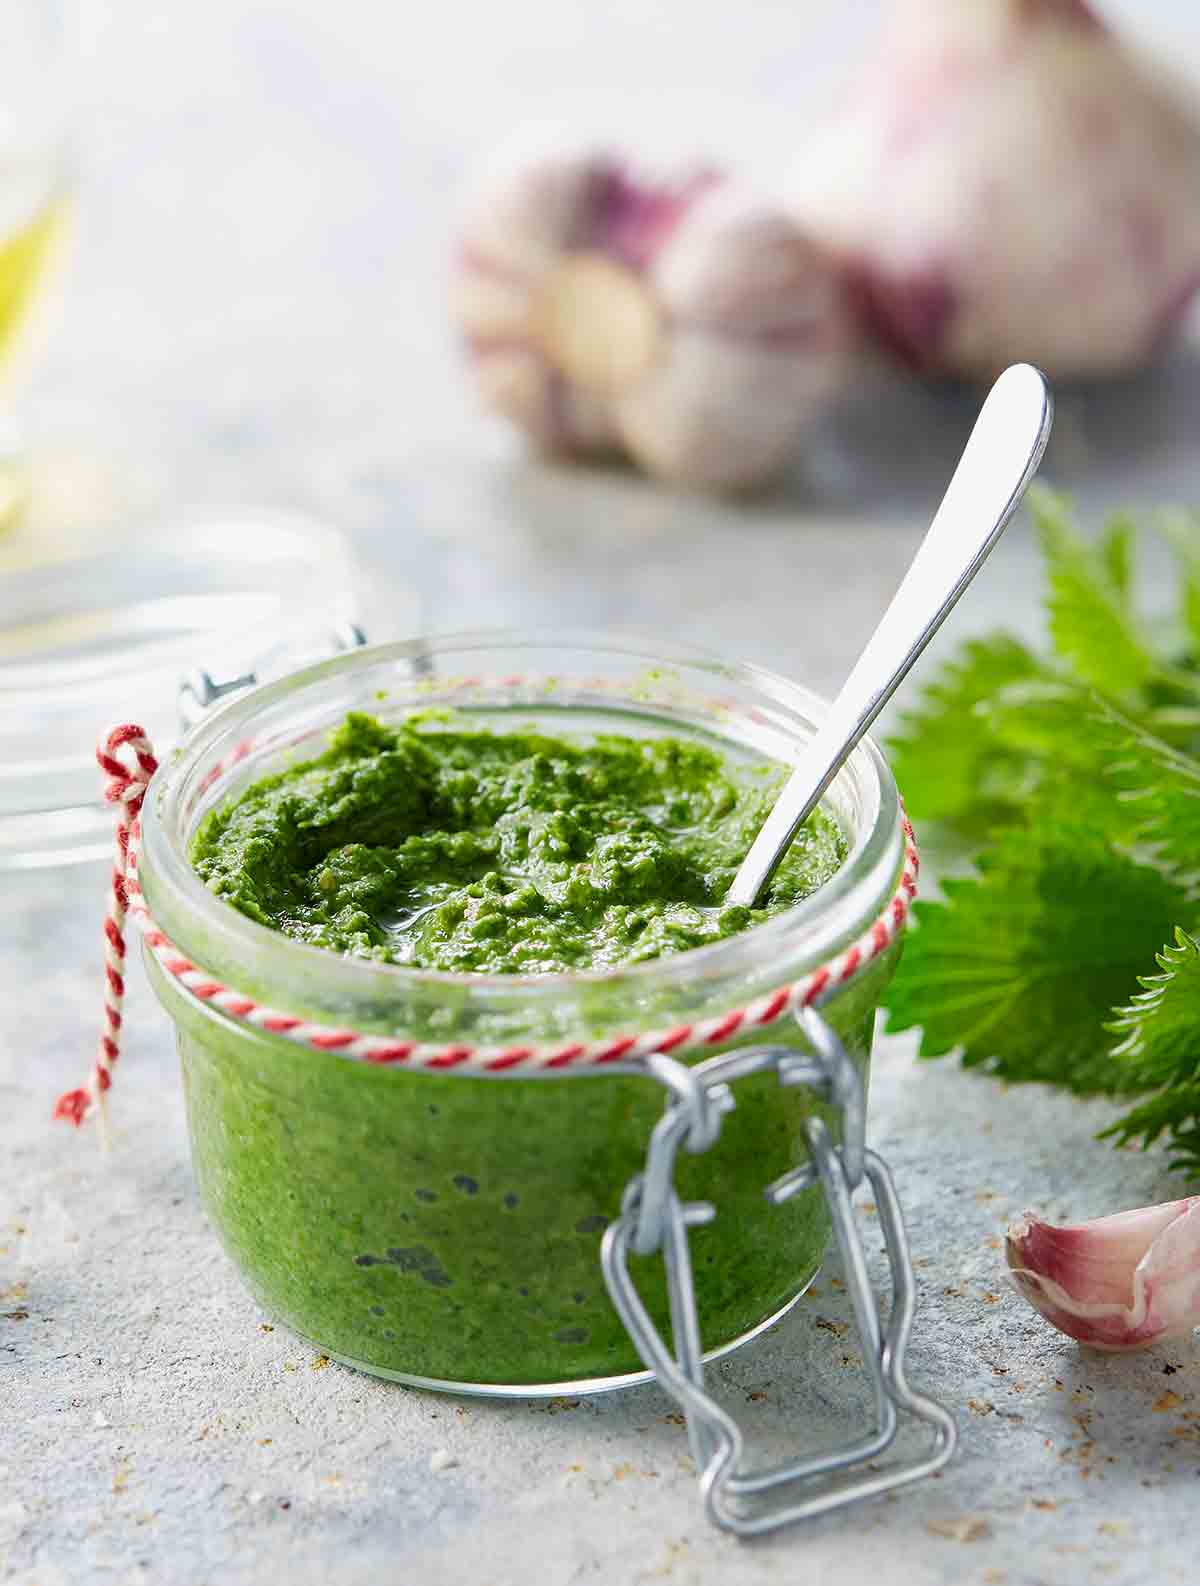 A small Mason jar of green nettle pesto with garlic cloves and nettle leaves nearby.